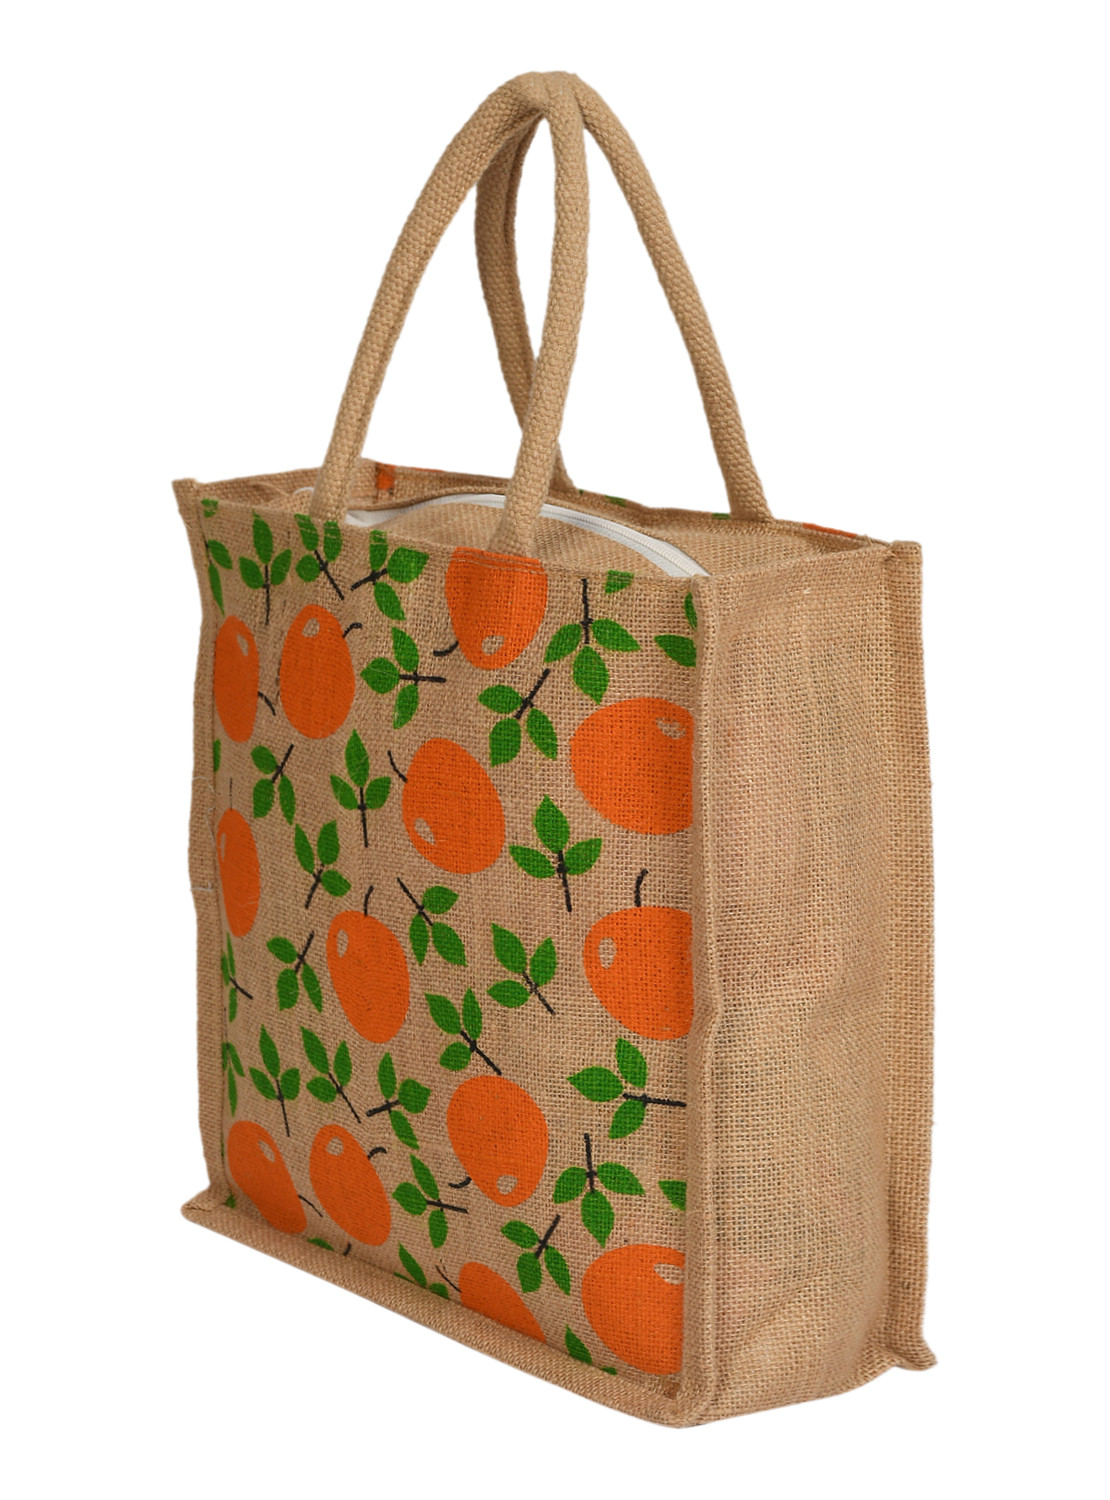 Kuber Industries Fruits Print Jute Reusable Eco-Friendly Hand Bag/Grocery Bag For Man, Woman With Handle (Orange) 54KM4362